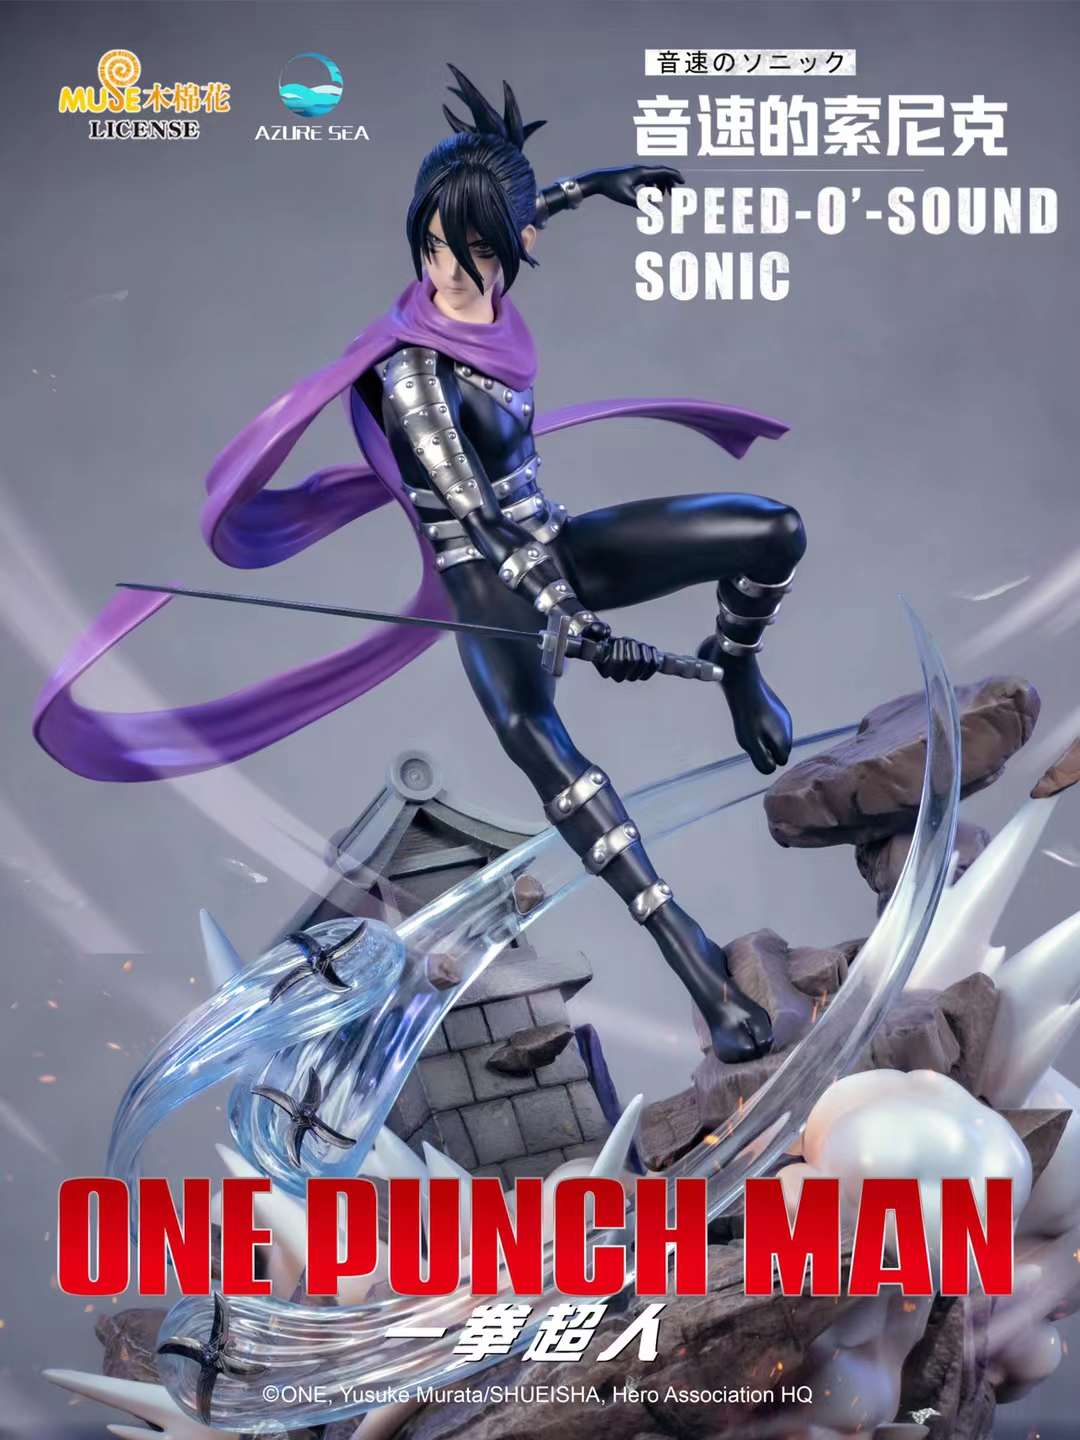 【Preorder】AzureSea Studio One Punch-Man Speed-o'-Sound Sonic Copyright 1/6 Poly Statue